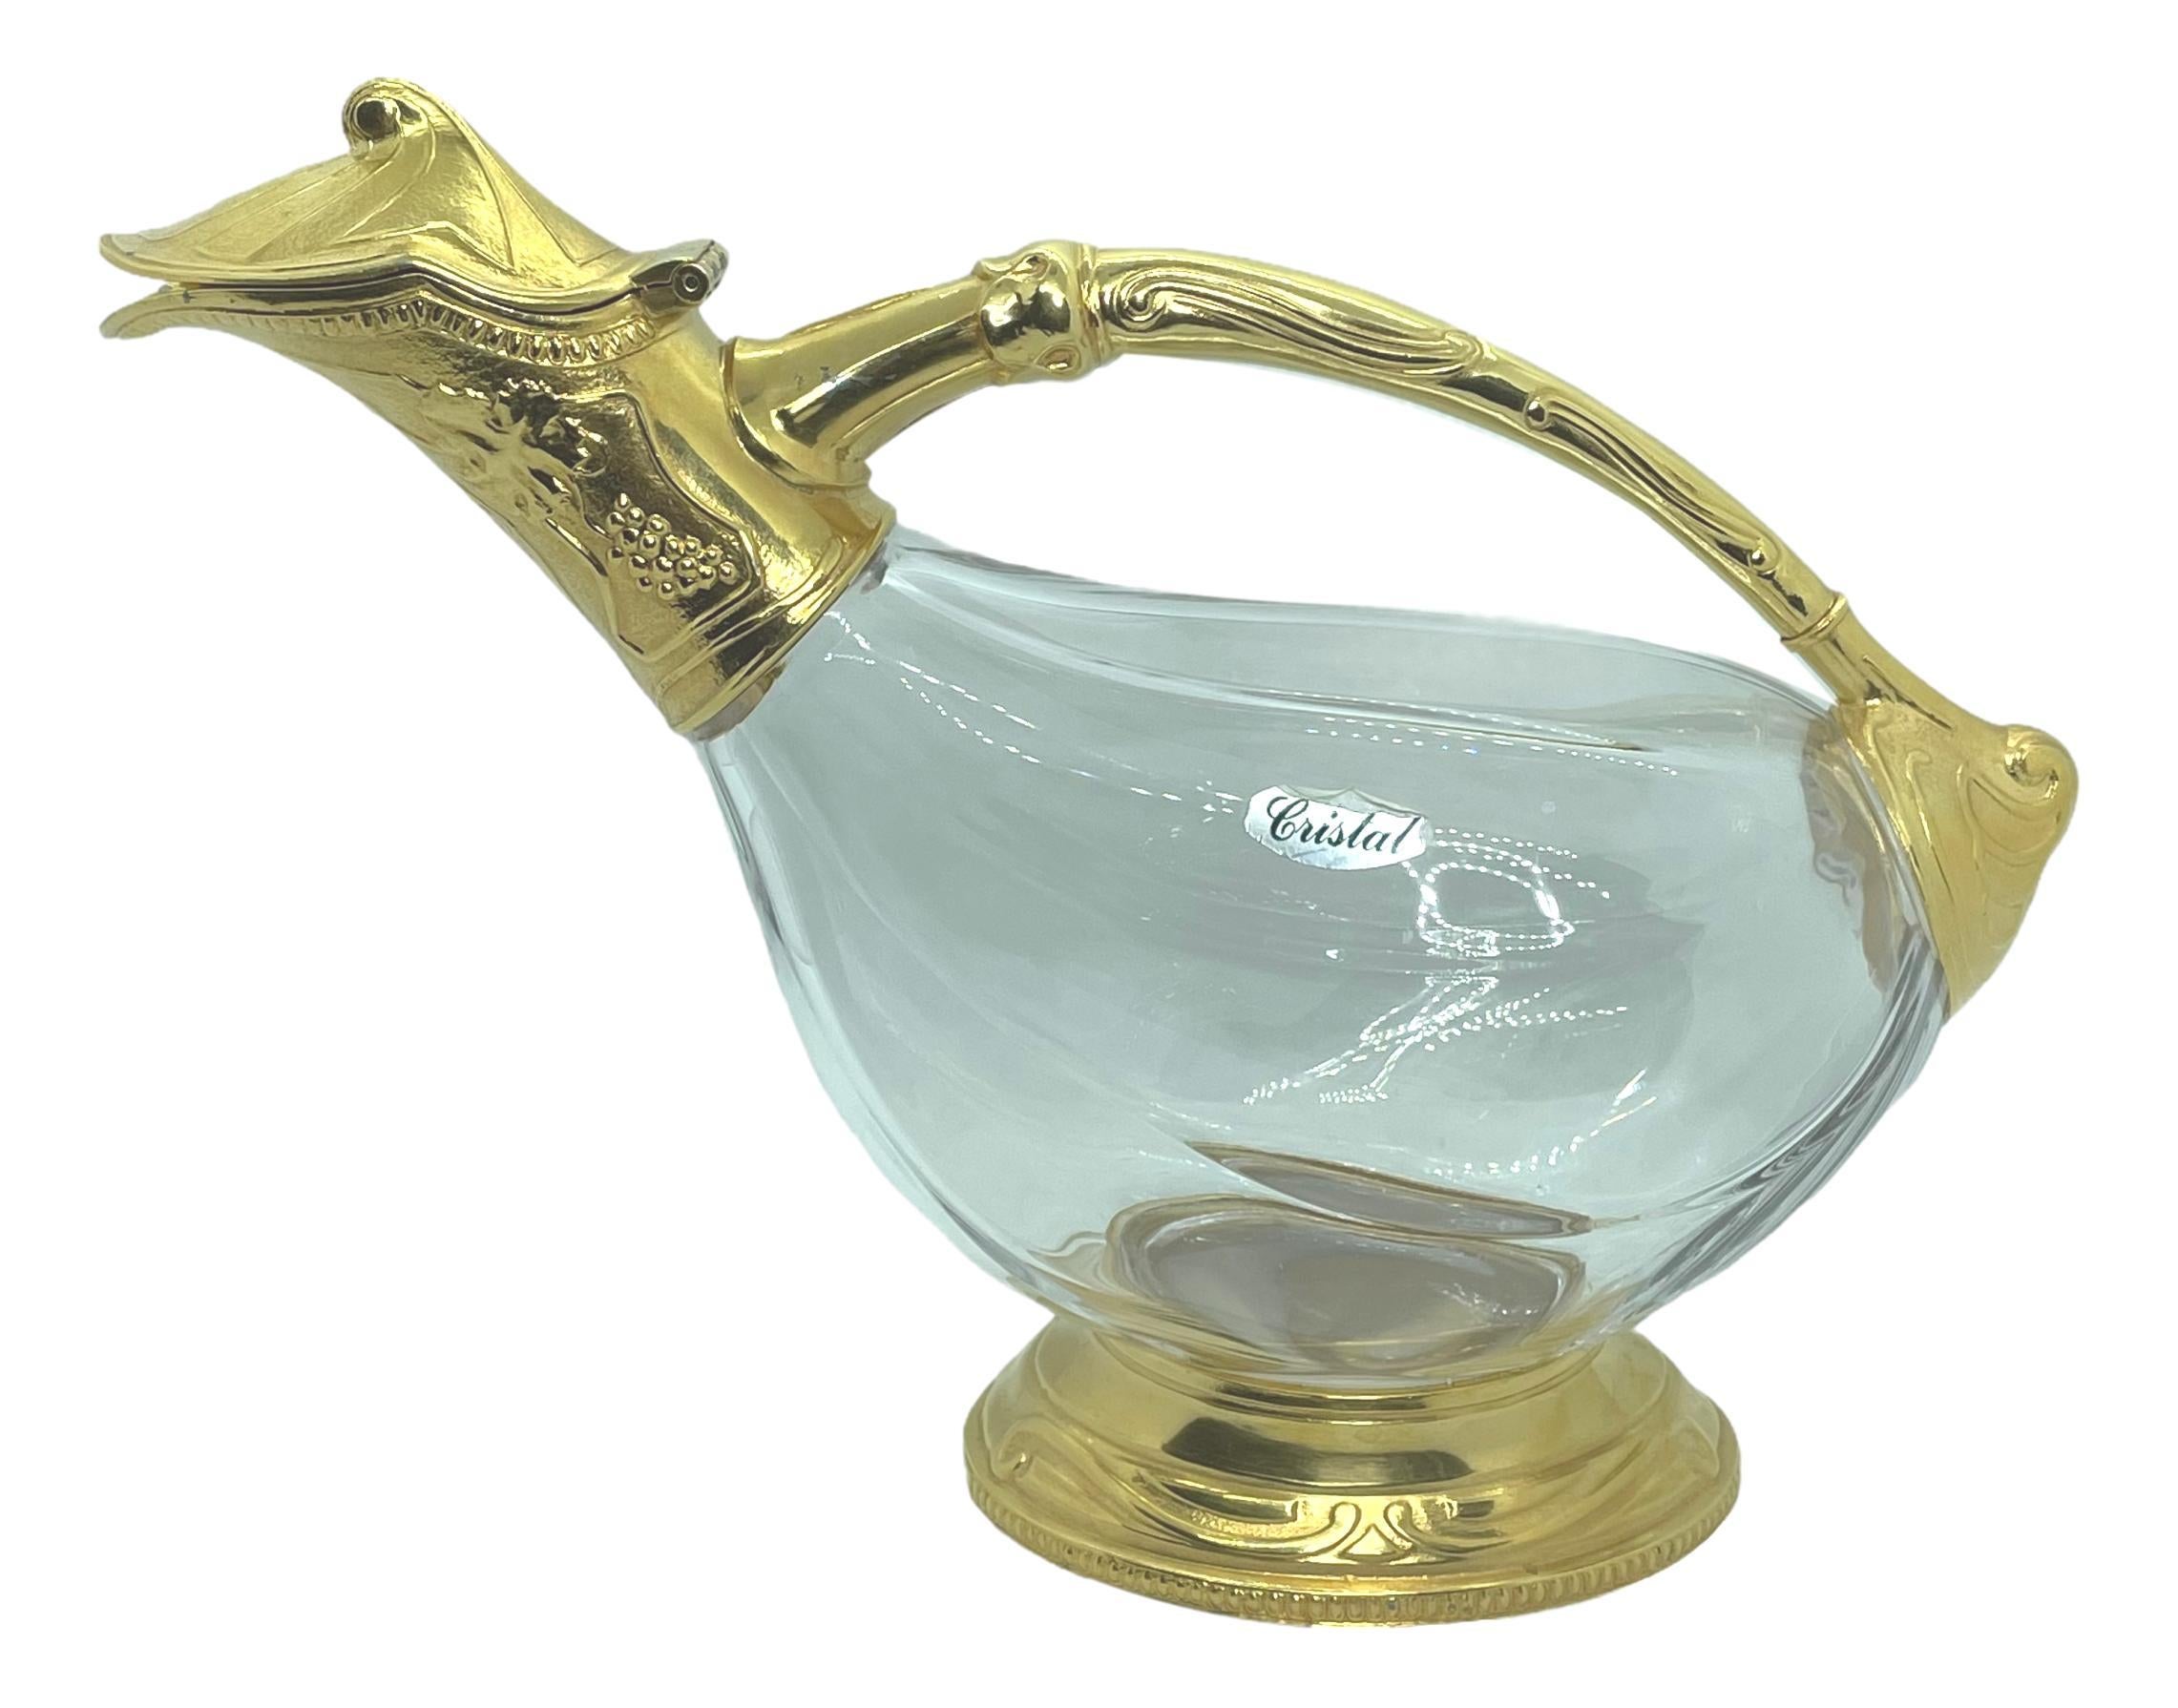 Classic Art Nouveau style wine decanter made by Etains du Manor, France. Nice addition to your table or bar.